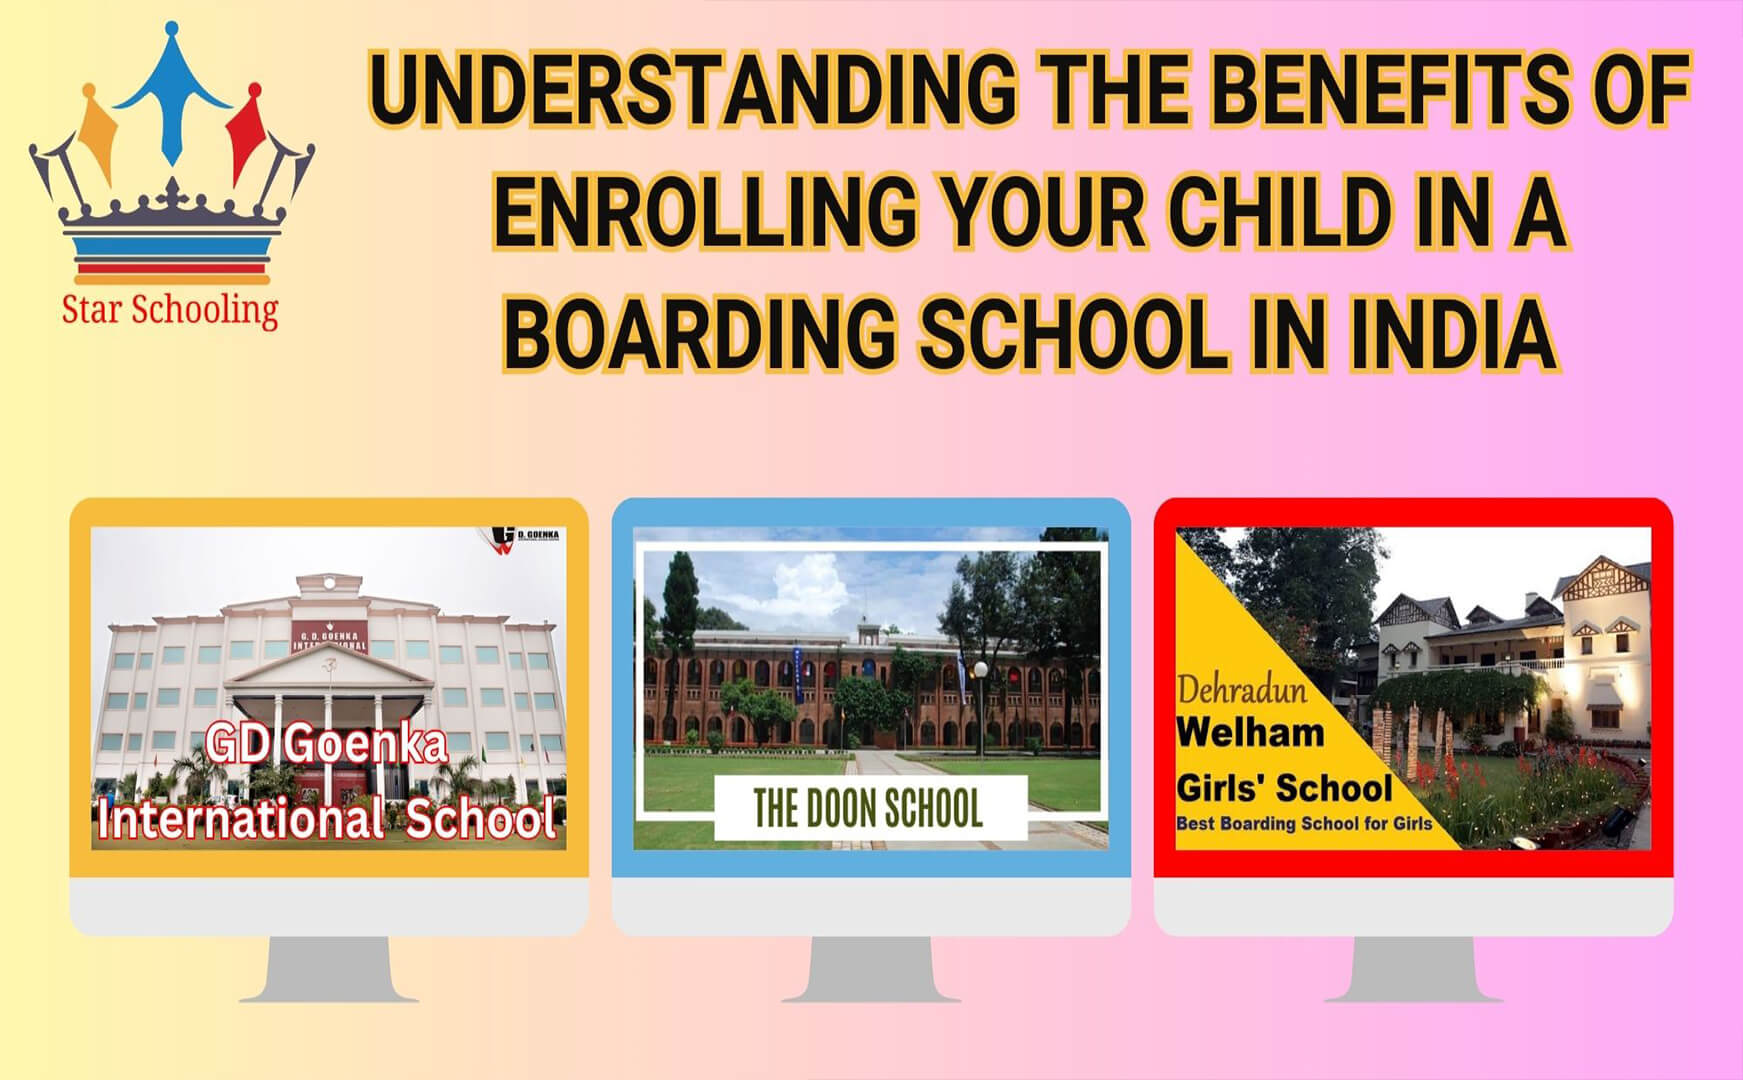 Understanding the benefits of enrolling your child in a boarding school in India